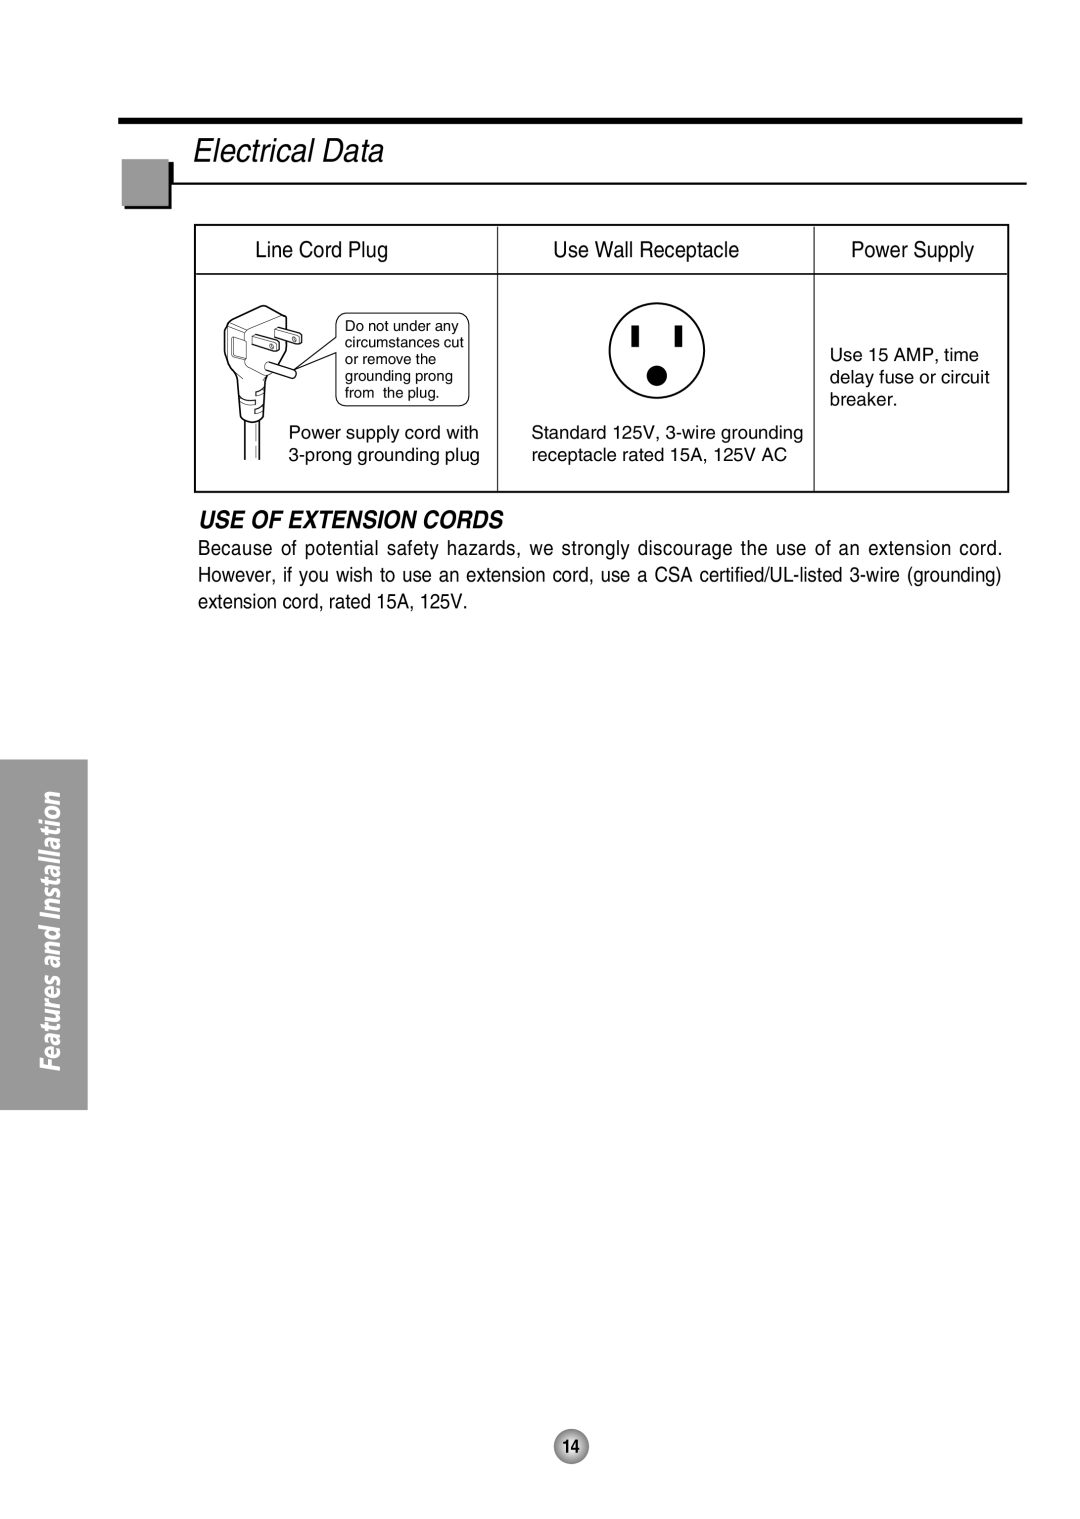 Panasonic CW-XC80HU manual Electrical Data, Use Of Extension Cords, Line Cord Plug, Use Wall Receptacle, Power Supply 